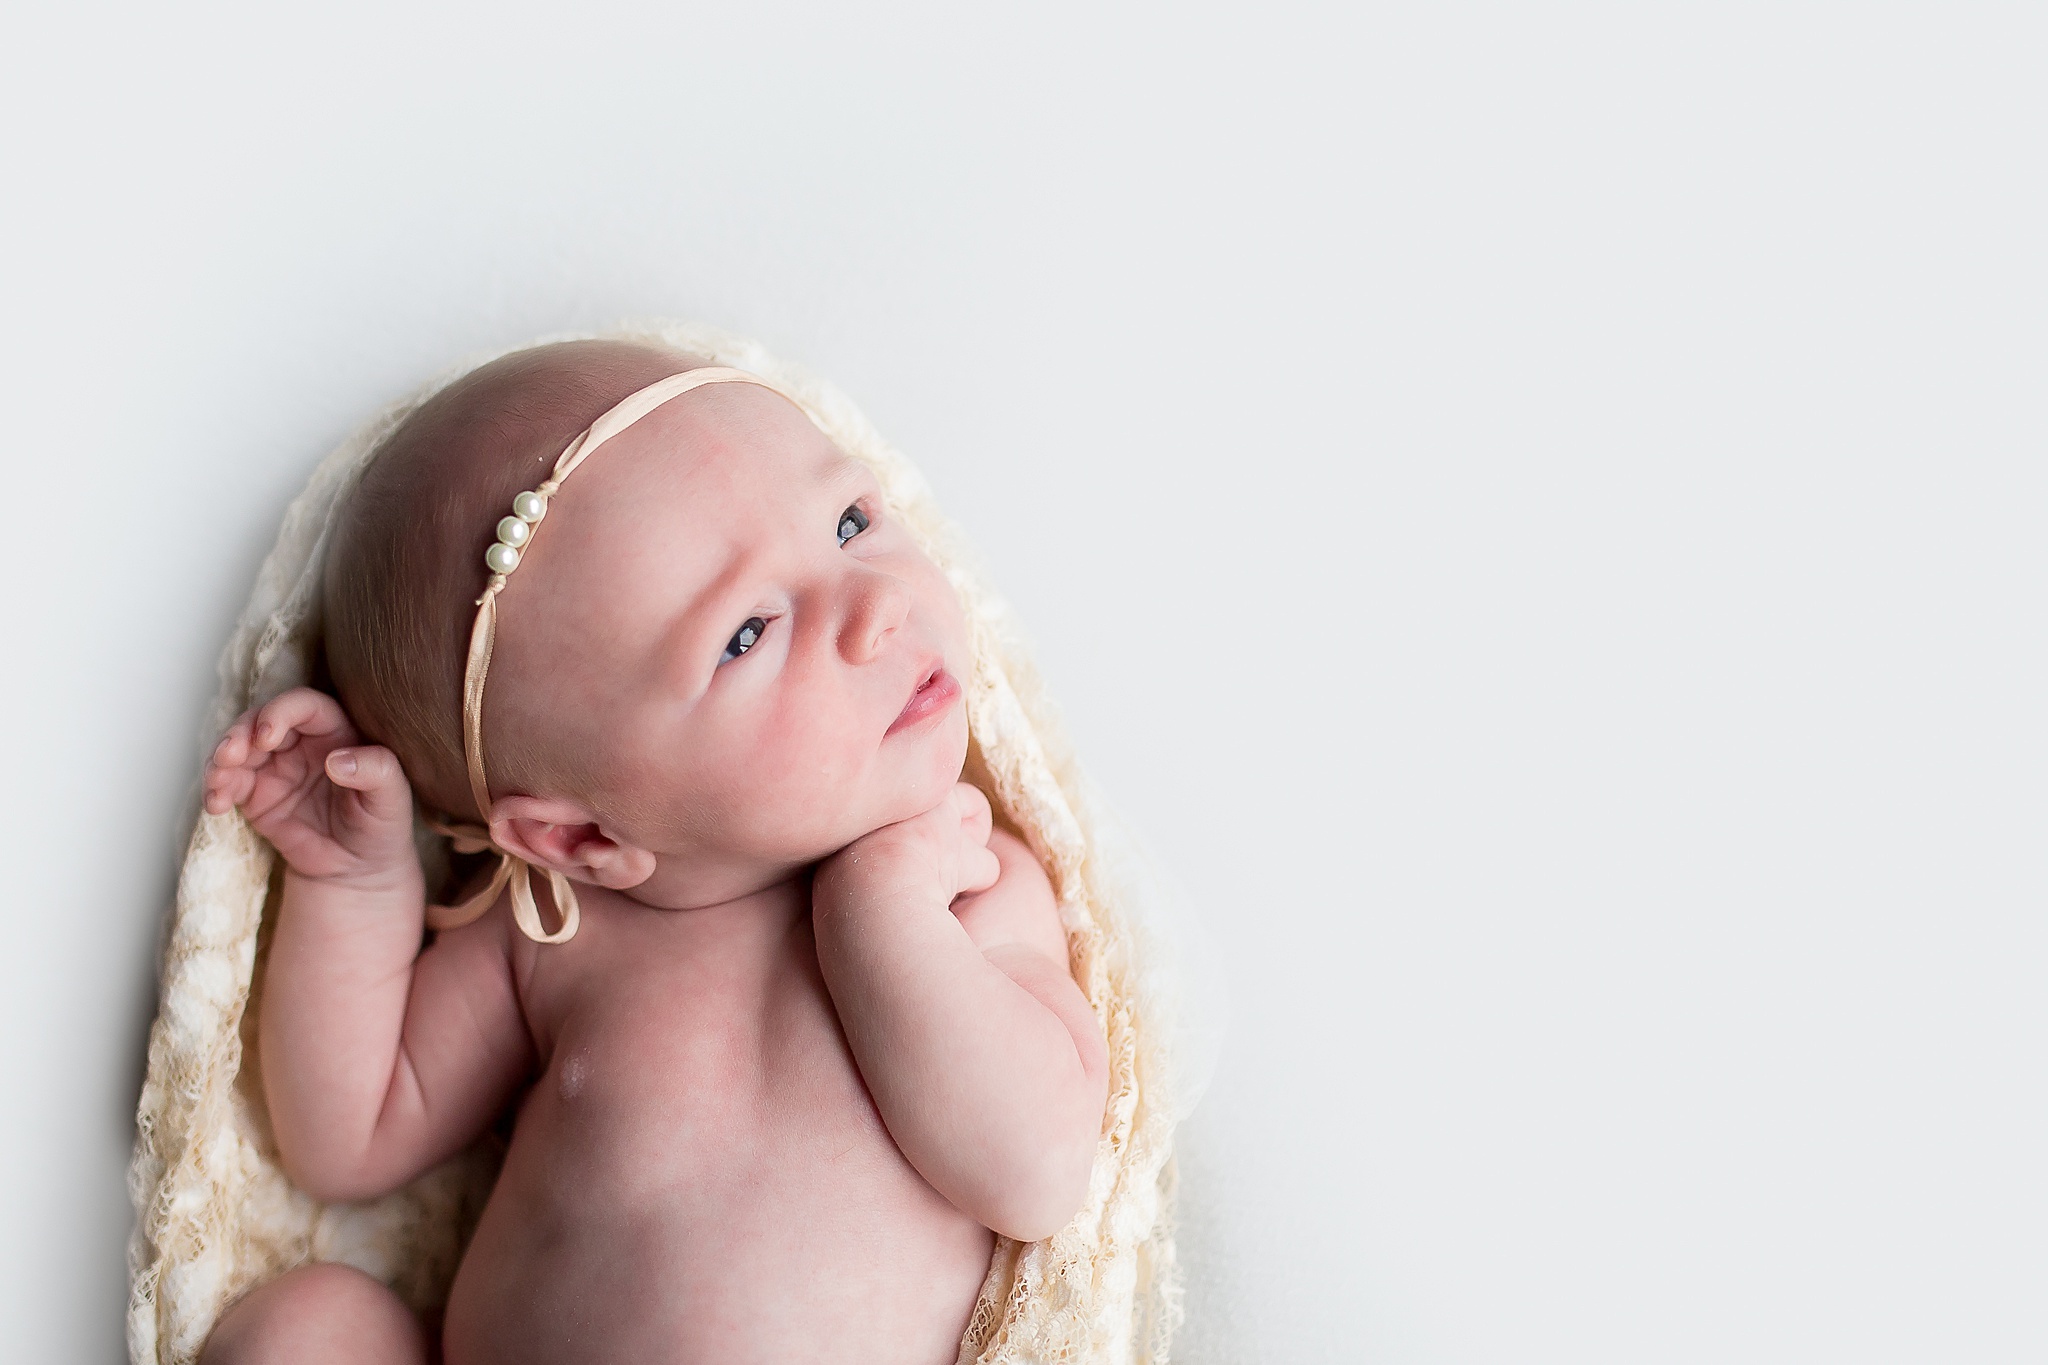 Marcie Reif is a newborn photographer located in Atlanta GA where she specializes in simple newborn photography